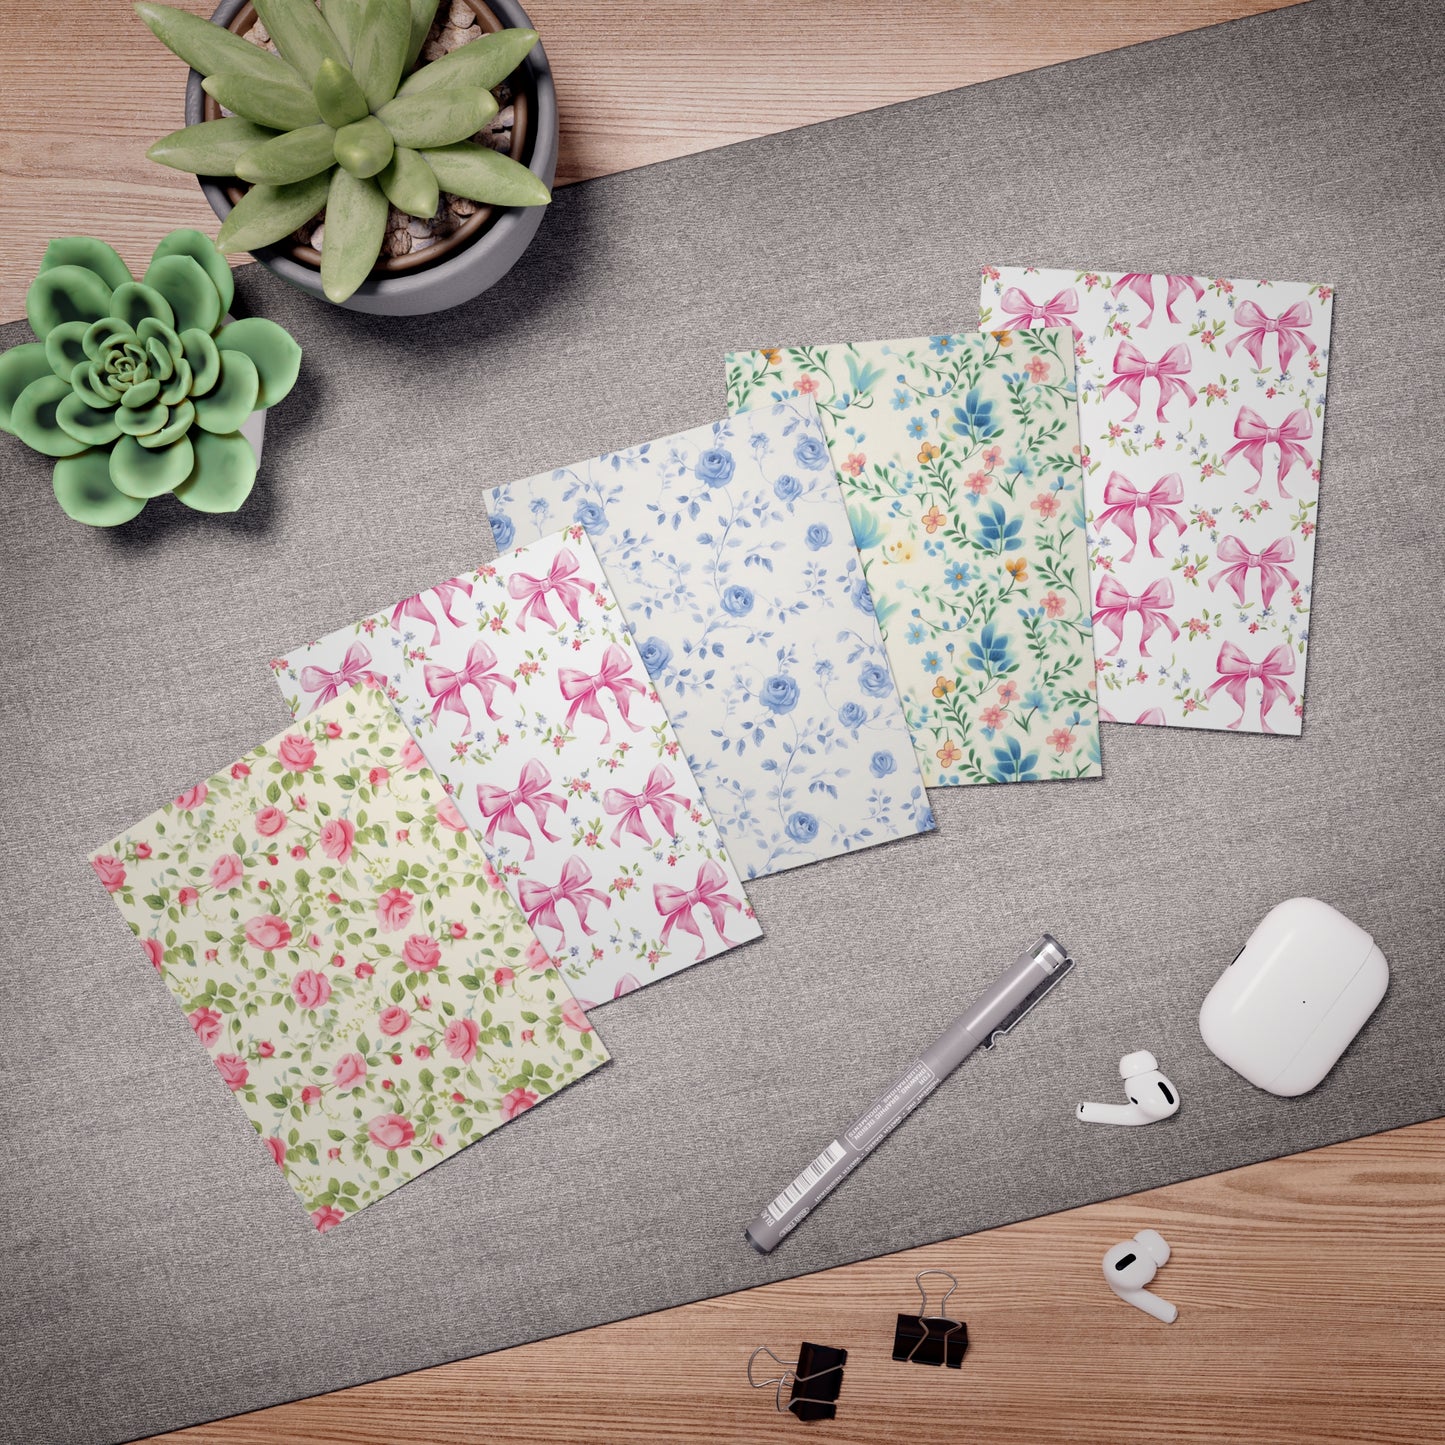 Lp- Bow and Flowers Multi-Design Greeting Cards (5-Pack)